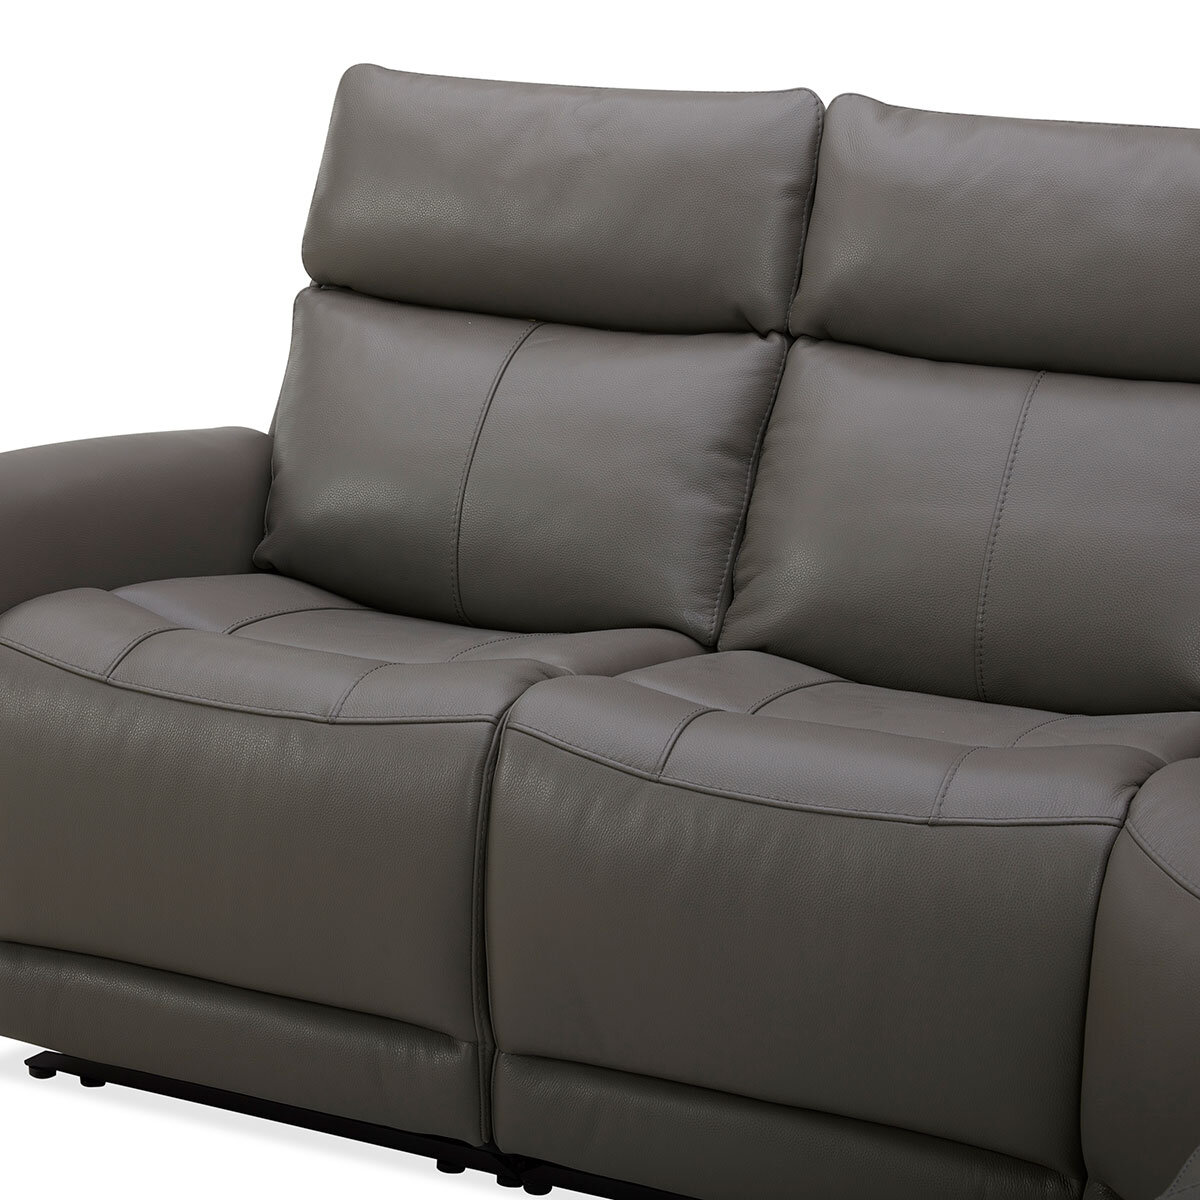 Gilman Creek Hadley Leather Reclining Sectional Sofa with Power Headrests